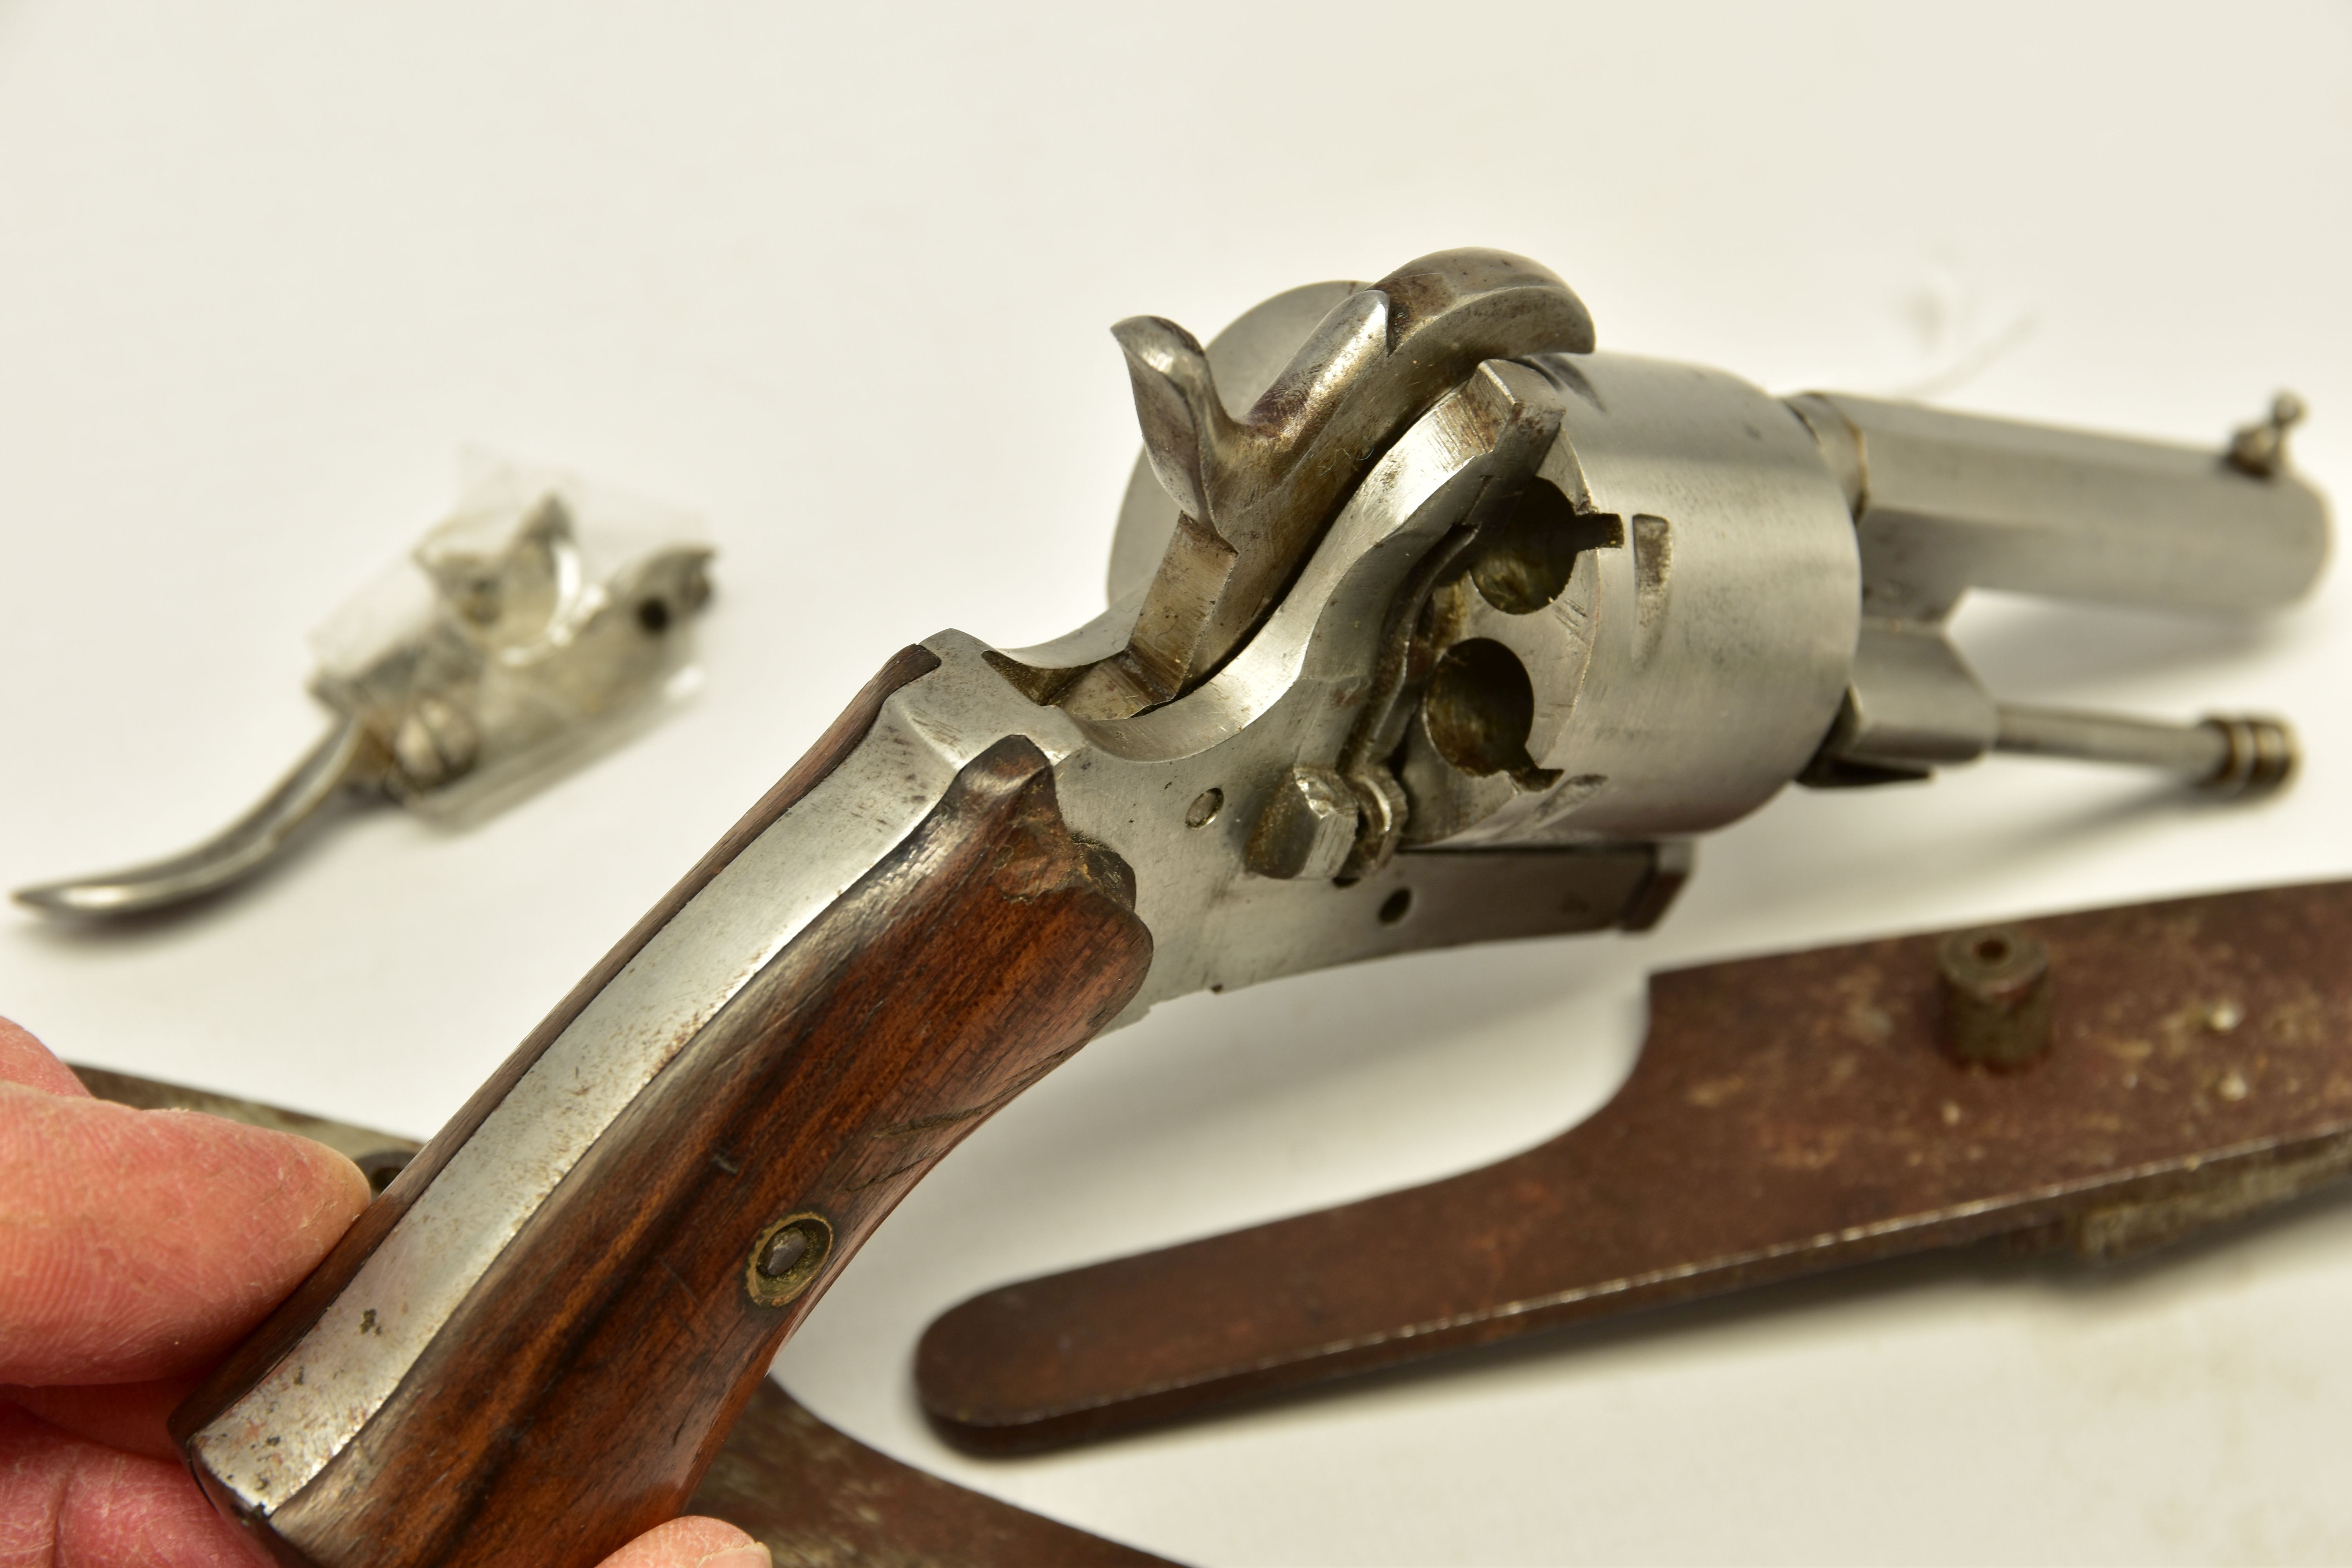 AN ANTIQUE 7MM BELGIAN PROVED PIN-FIRE REVOLVER, partly dismantled and missing its loading gate - Image 6 of 7